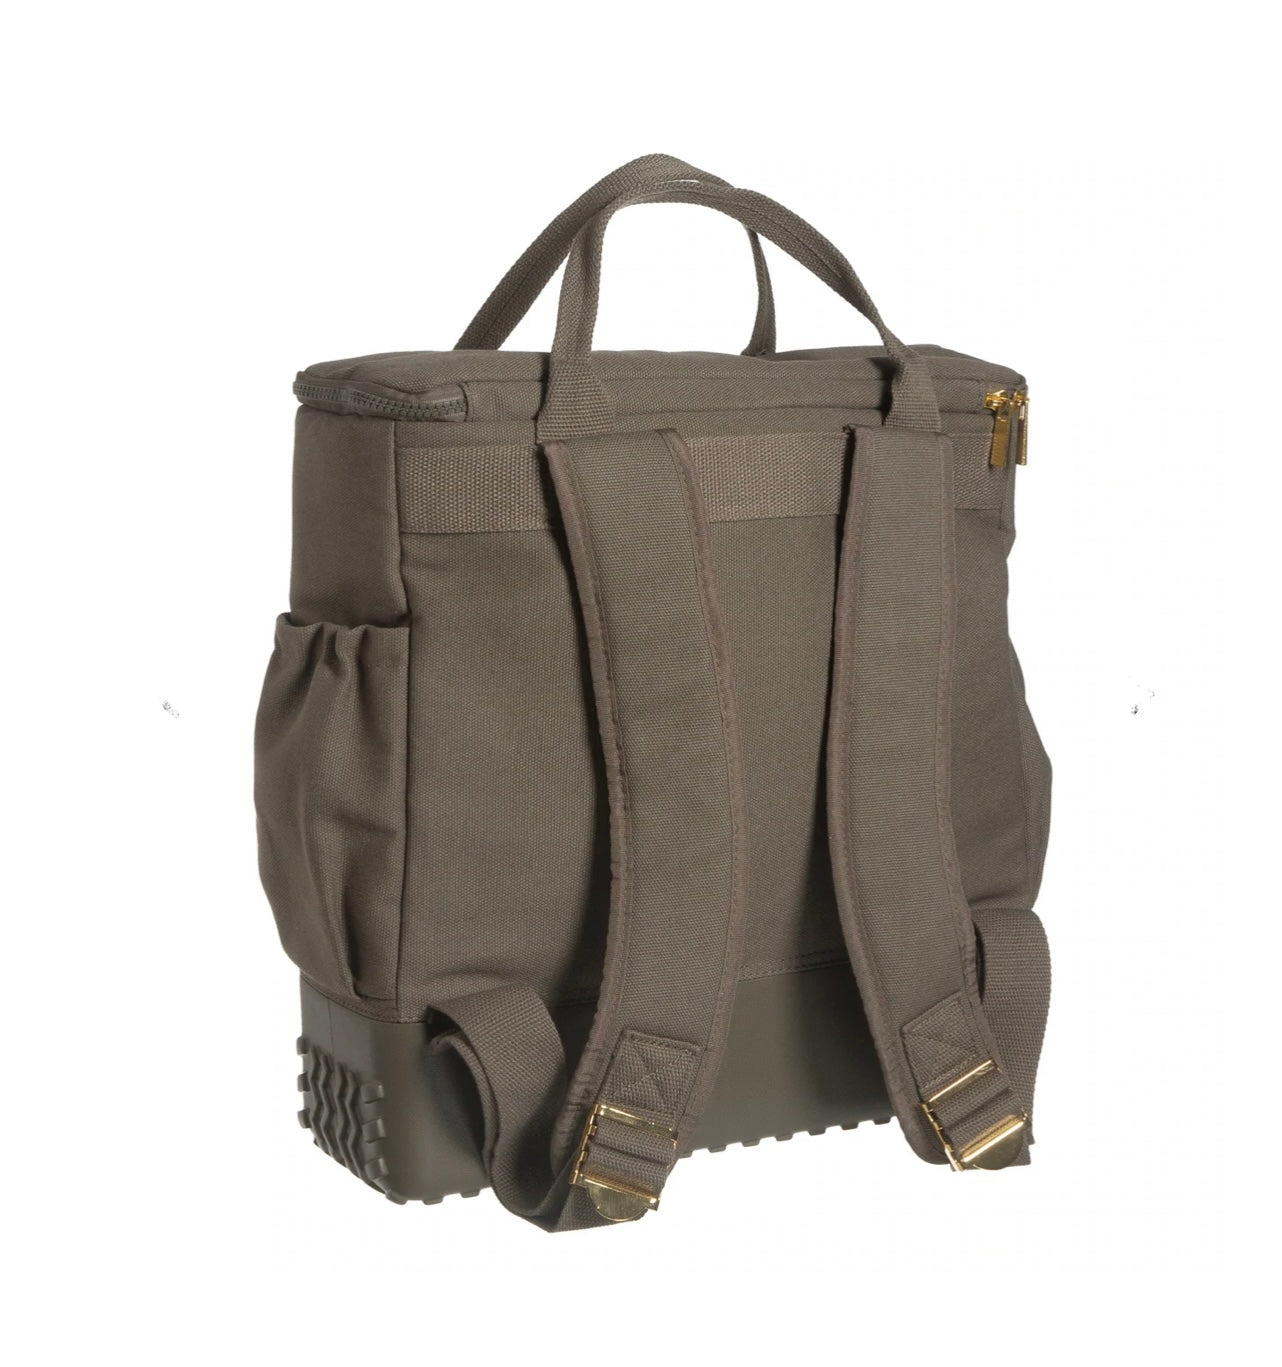 Bogg Bags: a Male's Opinion - IT IS AMAZING! 